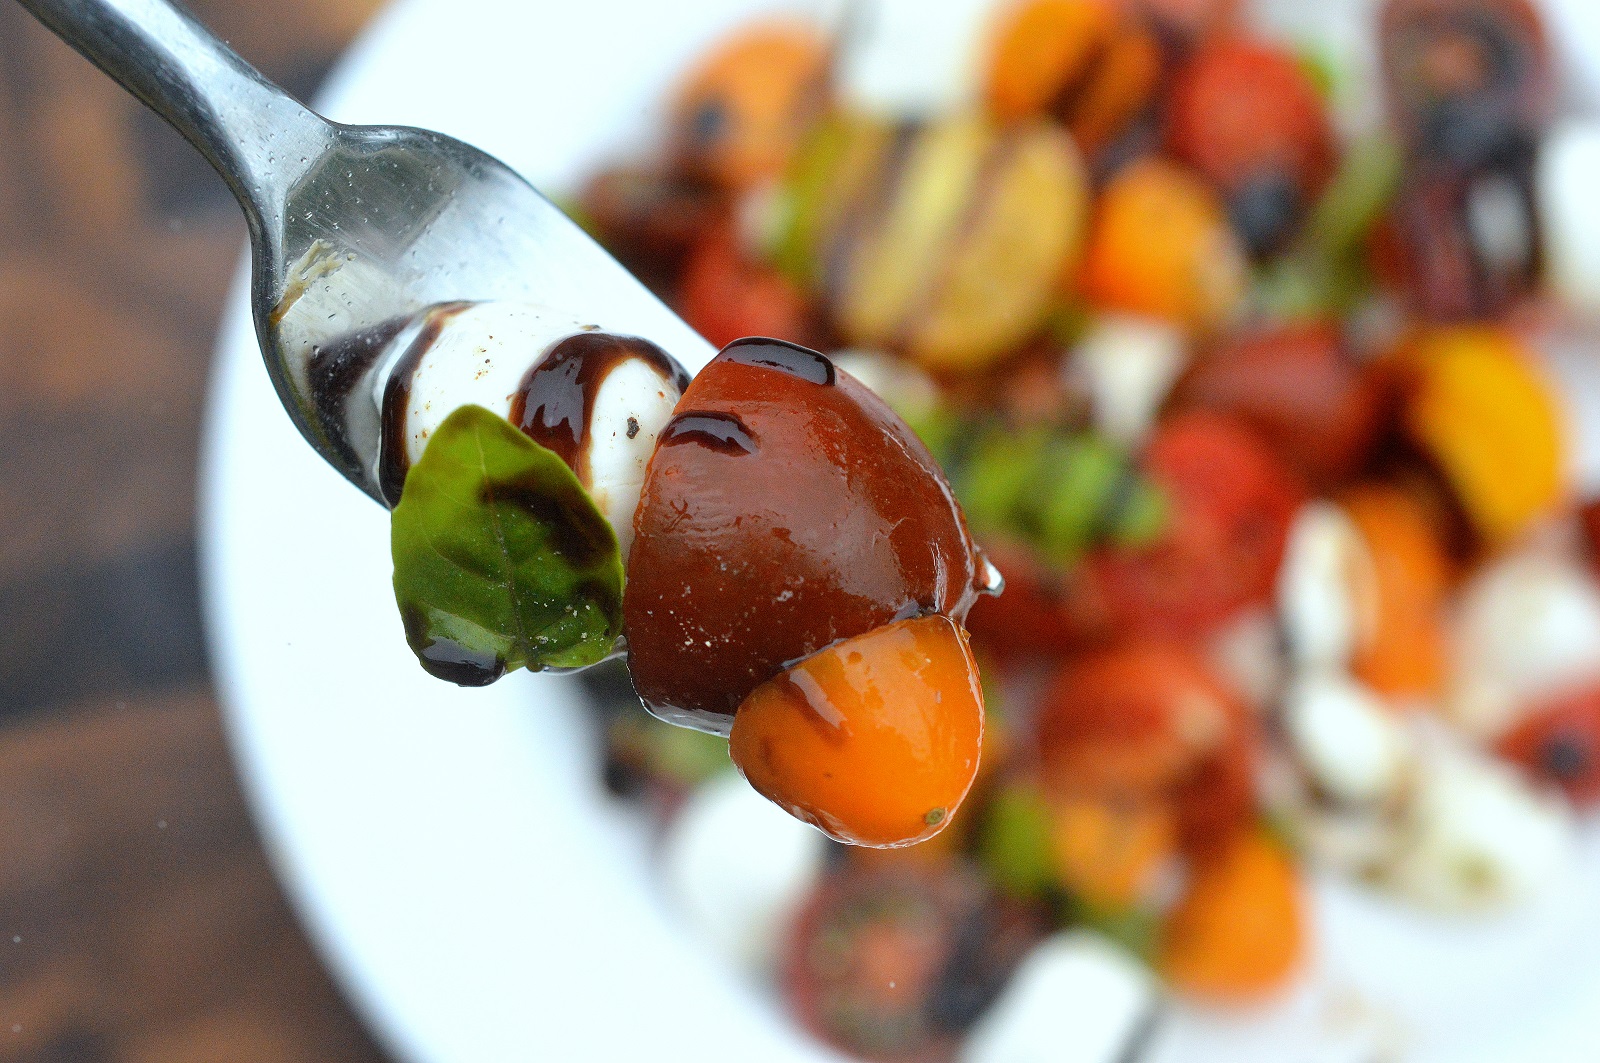 Artisam Tomato Caprese Salad with Balsamic Glaze, so simple, healthy and delicious!